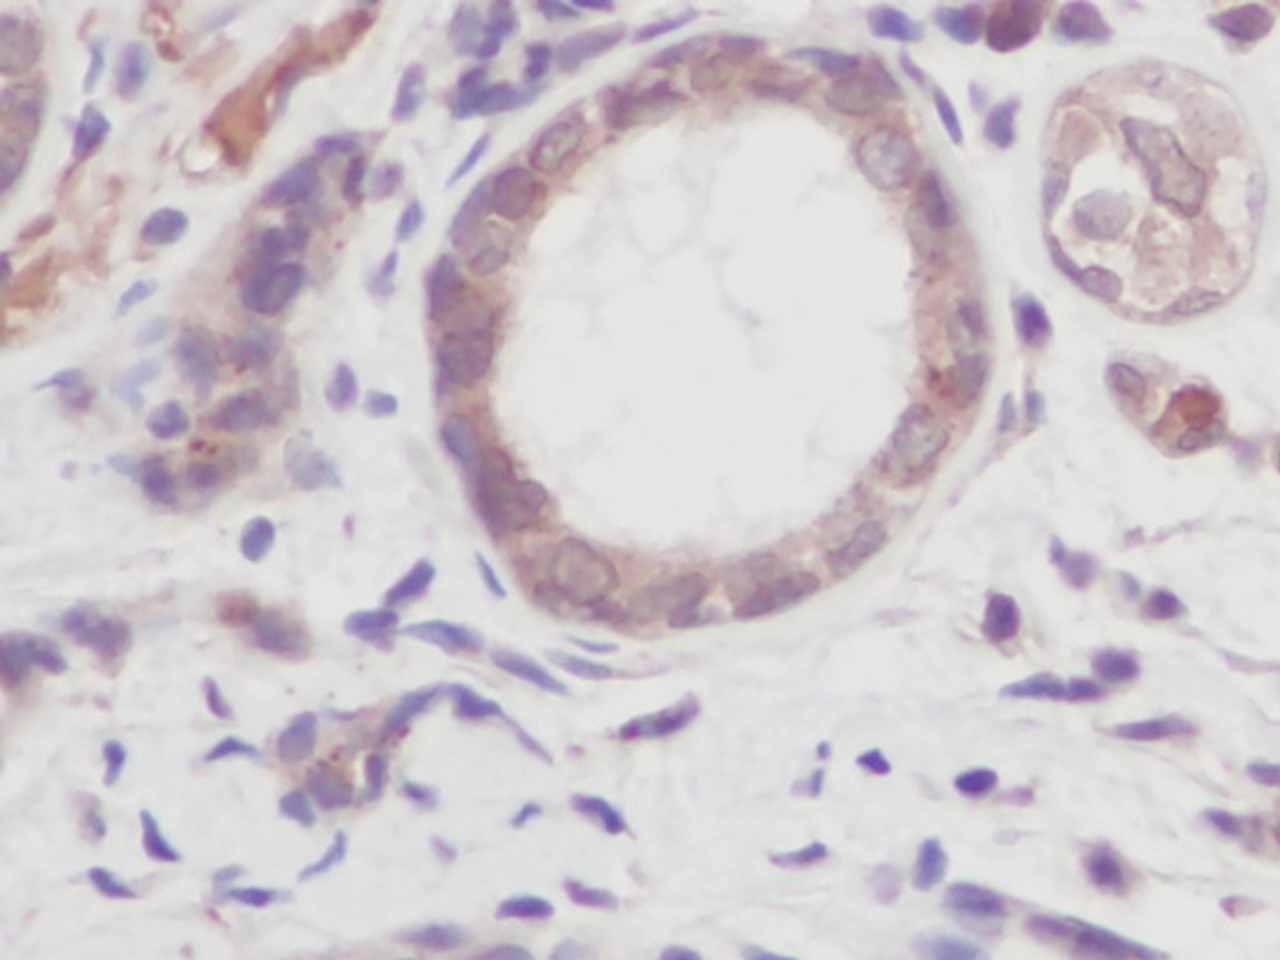 This antibody stained formalin-fixed, paraffin-embedded sections of human breast invasive ductal carcinoma. The recommended concentrations are 0.5 ug/ml-1.0 ug/ml with an overnight incubation at 4&#730;C. An HRP-labeled polymer detection system was used with a DAB chromogen. Heat induced antigen retrieval with a pH 6.0 Sodium Citrate buffer is recommended. Optimal concentrations and conditions may vary.